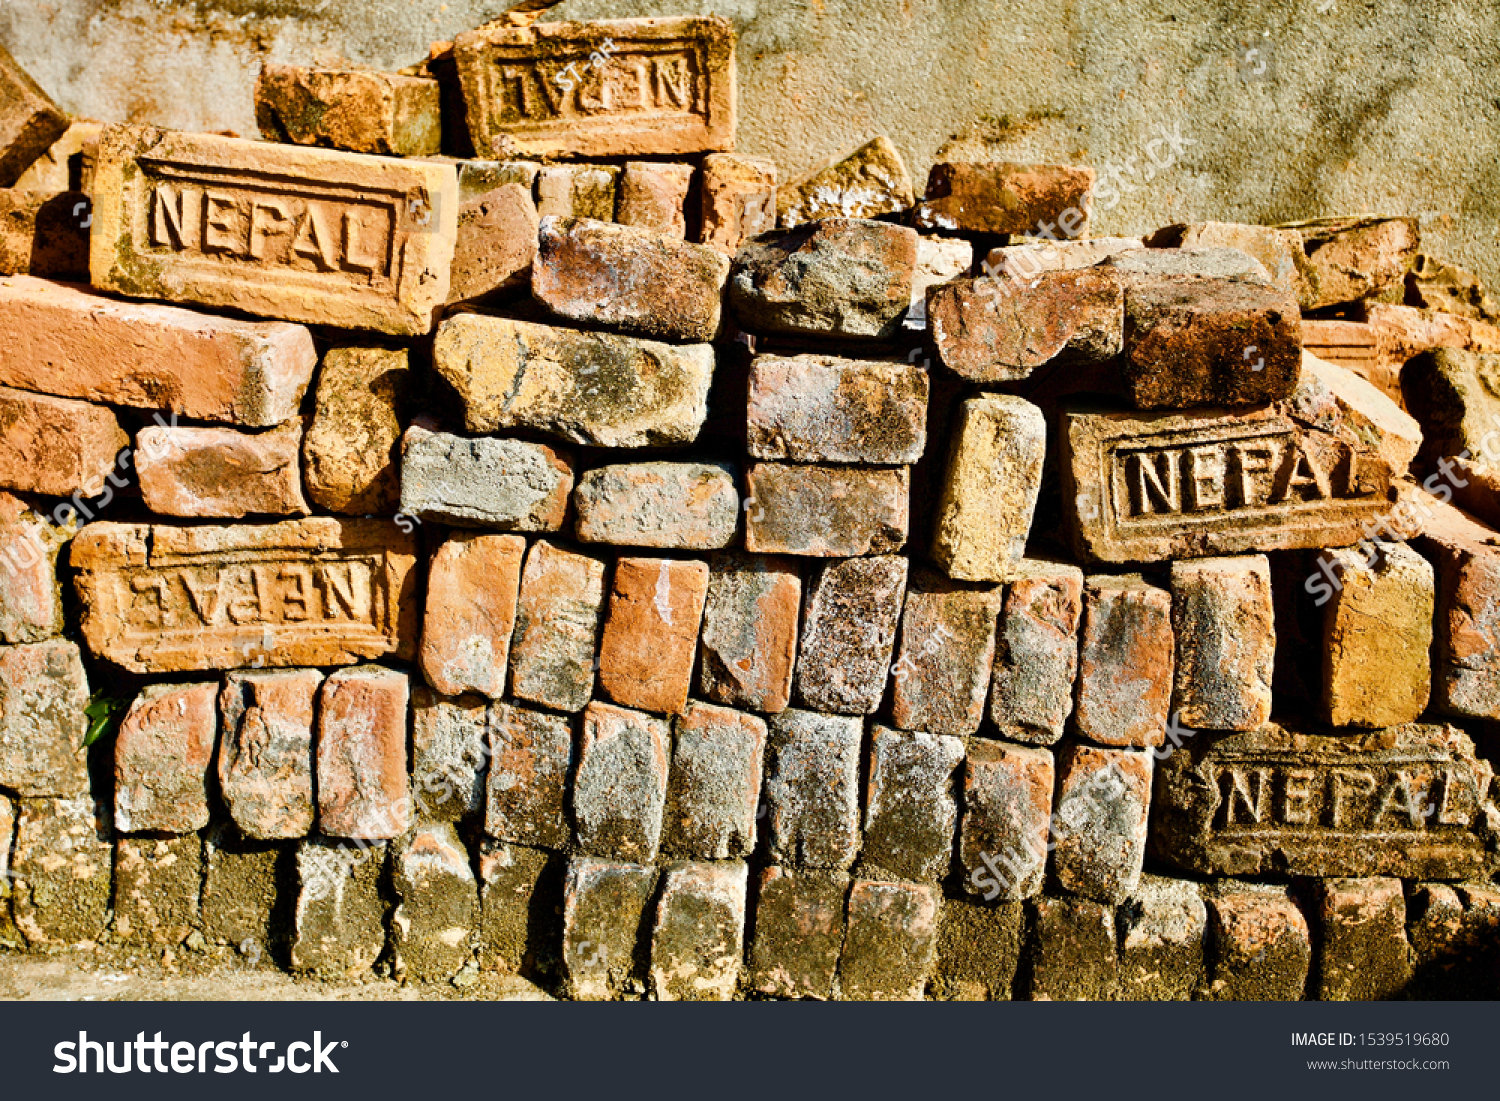 Bricks pile close up view. Old Bricks Texture. Orange and Yellow antique Bricks pattern. Construction industry raw materials. Building materials. Vintage Bricks pile from Nepal. Abstract backgrounds. #1539519680